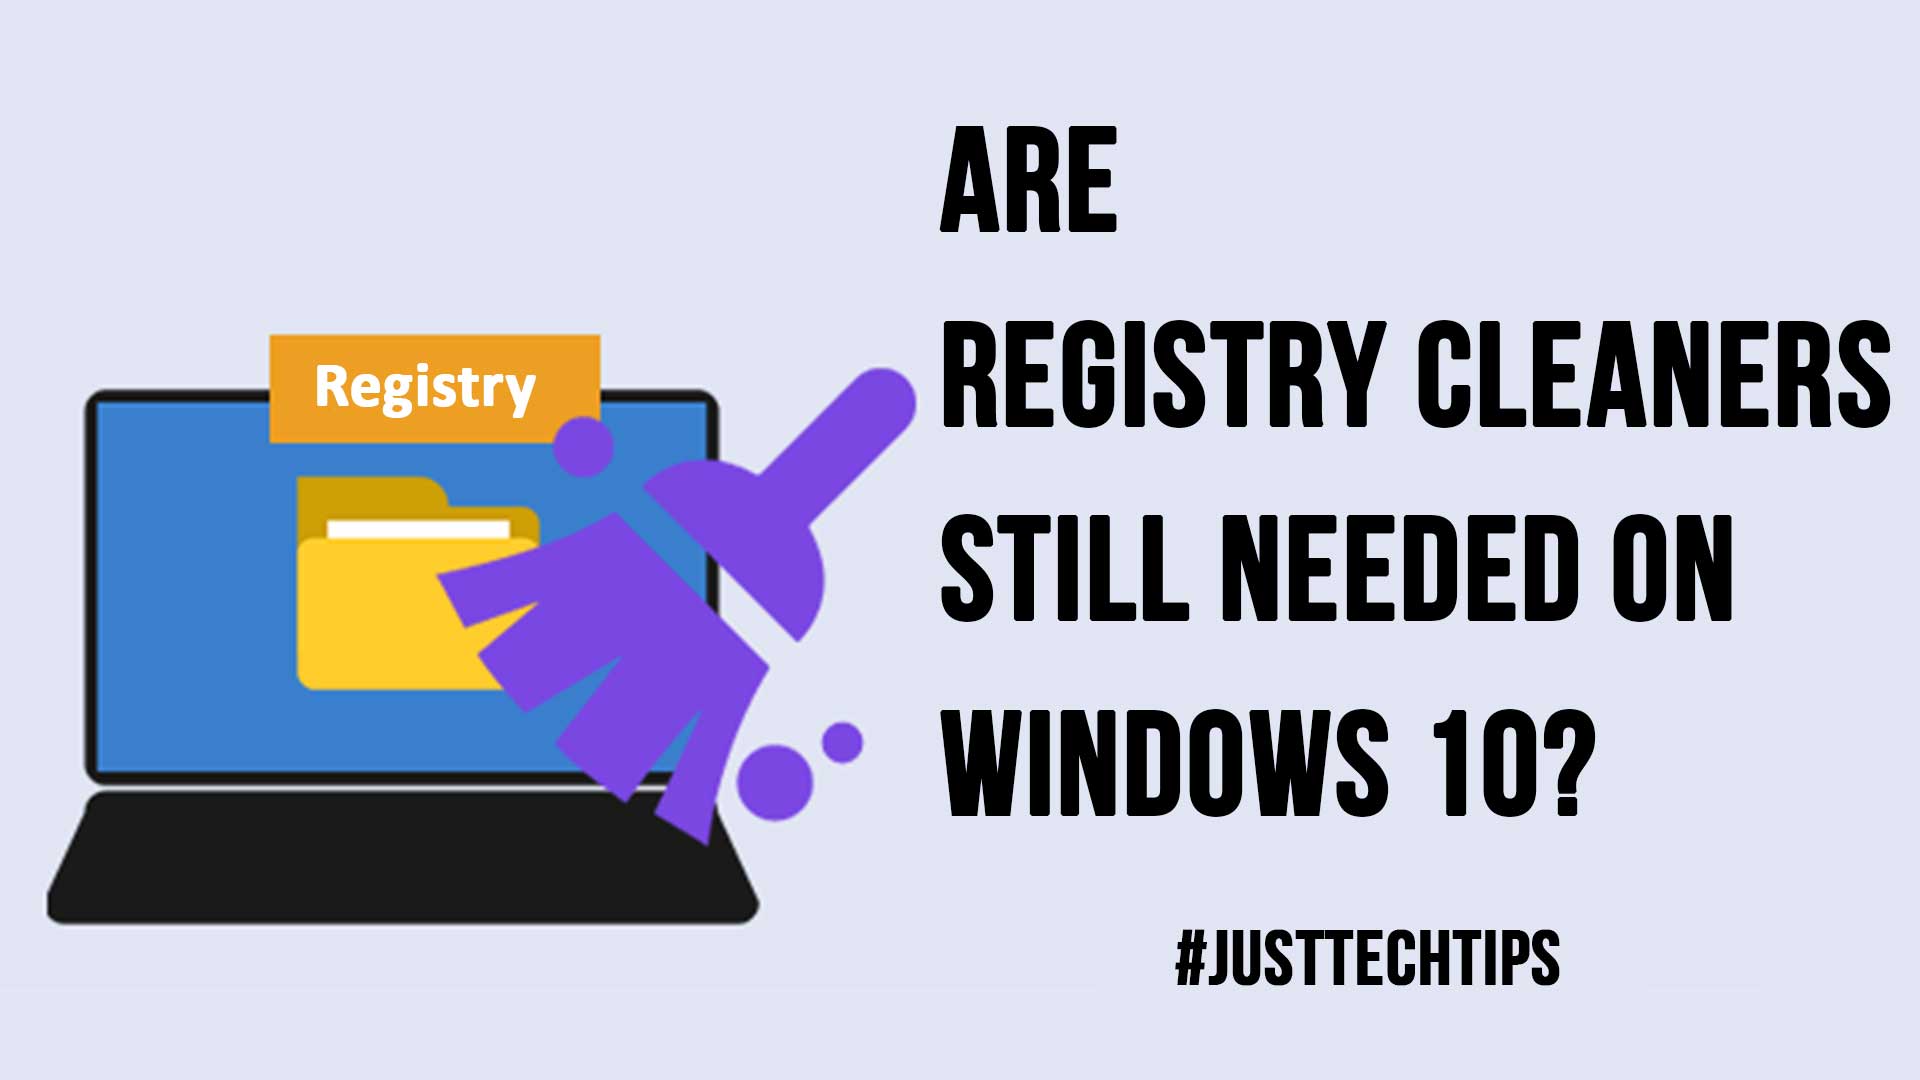 Are Registry Cleaners Still Needed on Windows 10